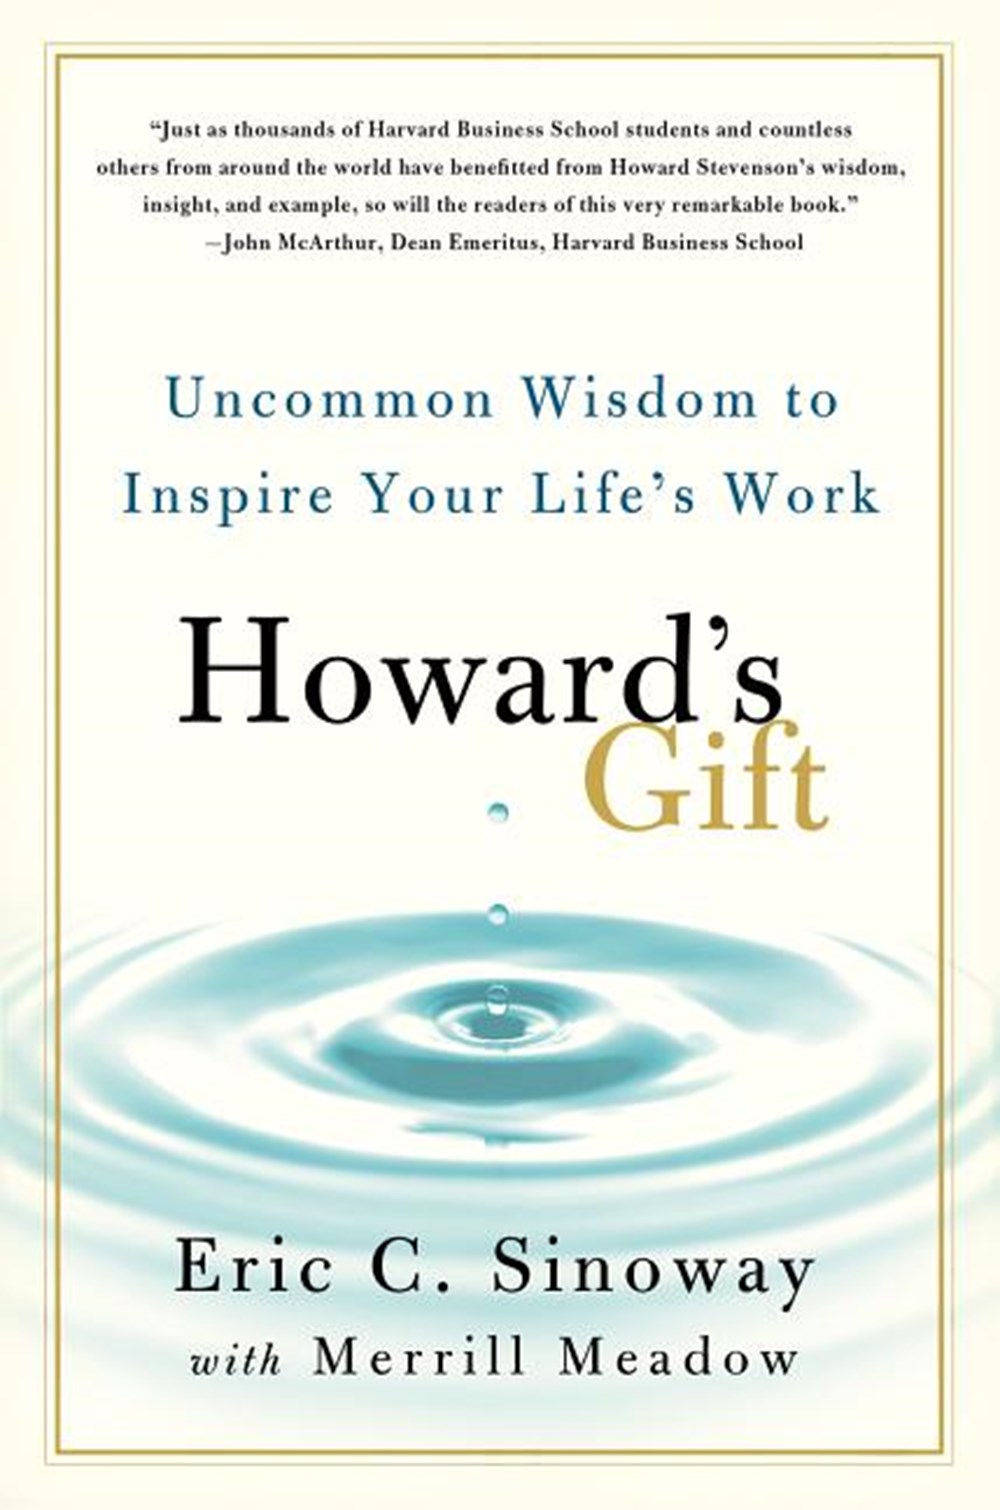 Howard's Gift Uncommon Wisdom to Inspire Your Life's Work